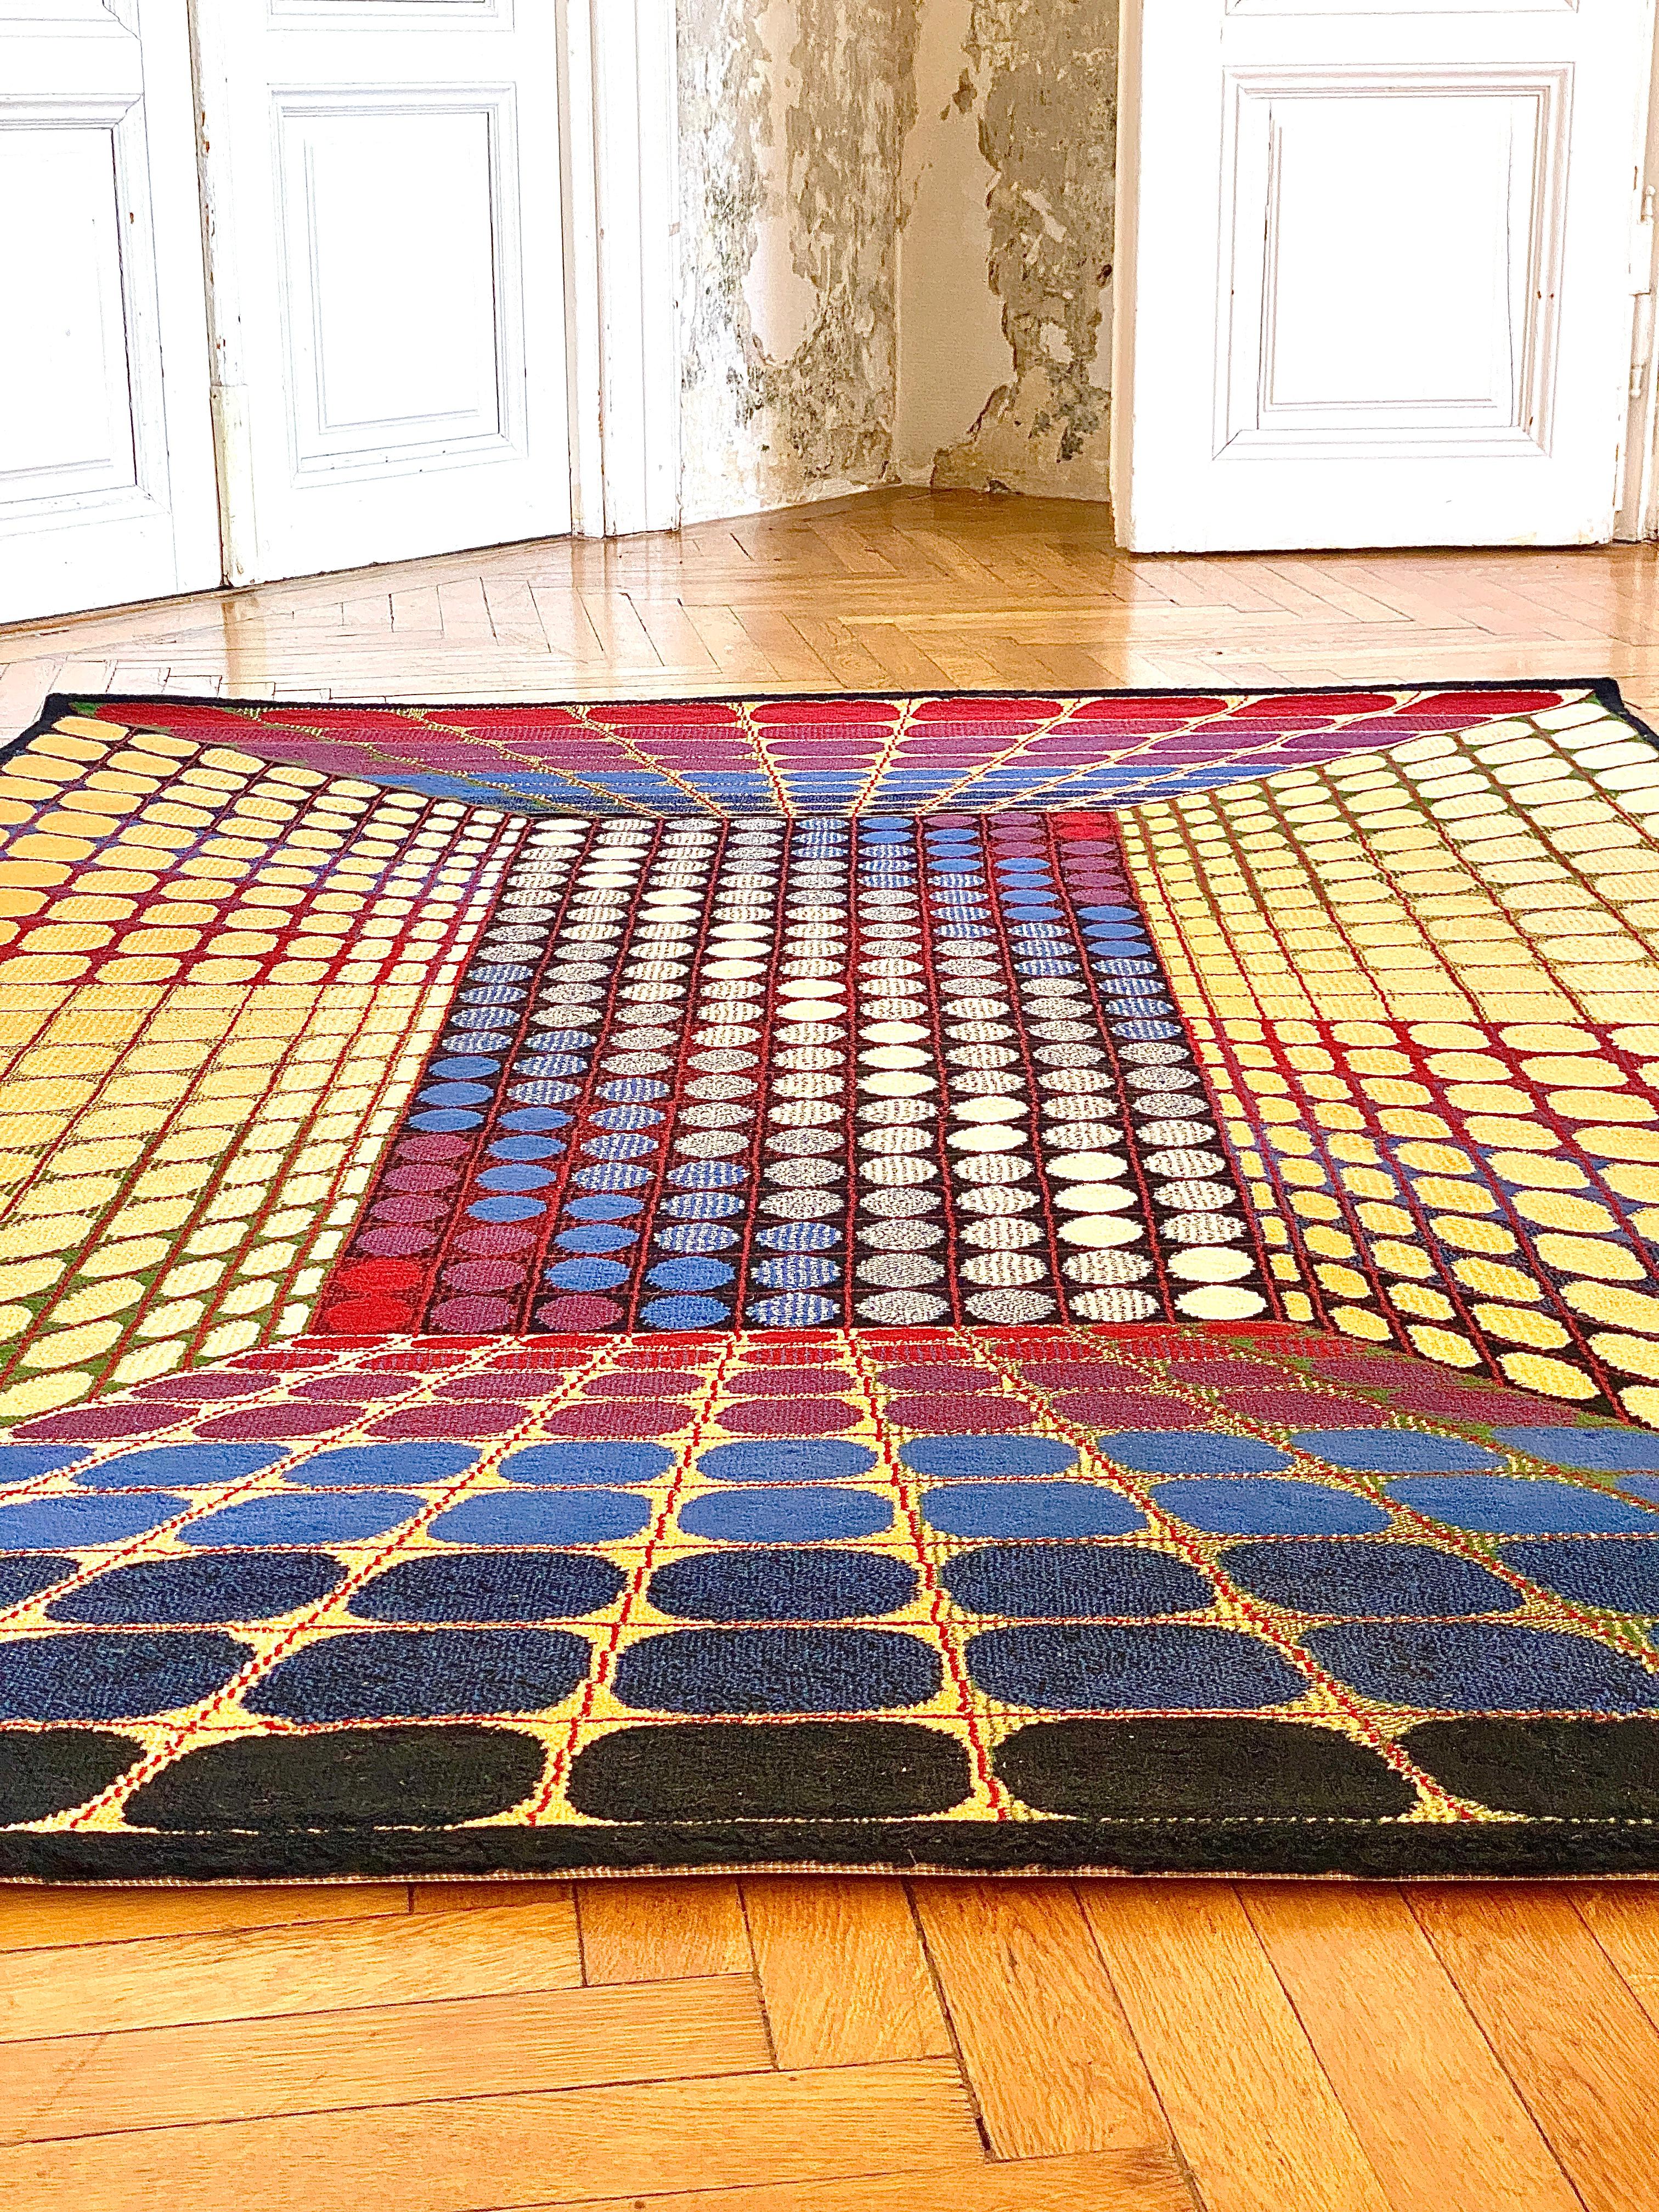 Large Victor Vasarely Attributed Geometric 3D Op-Art Carpet Rug, Germany, 1970s 1